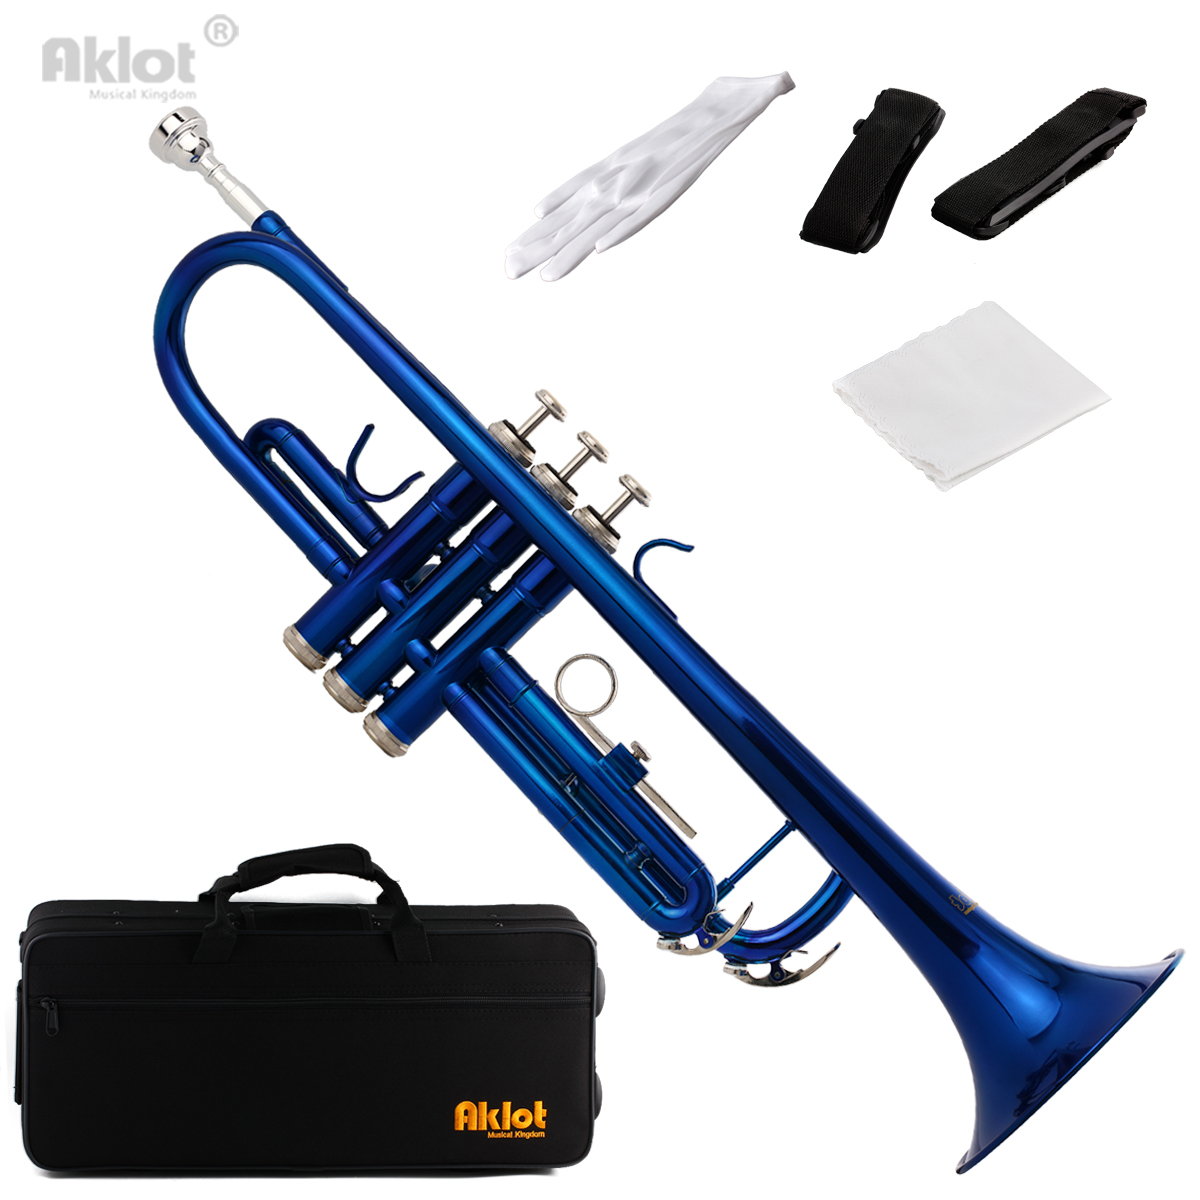 Aklot Bb B Flat Beginner Trumpet with 7C Silver Plated Mouthpiece Blue Lacquered Brass Body for Student Band